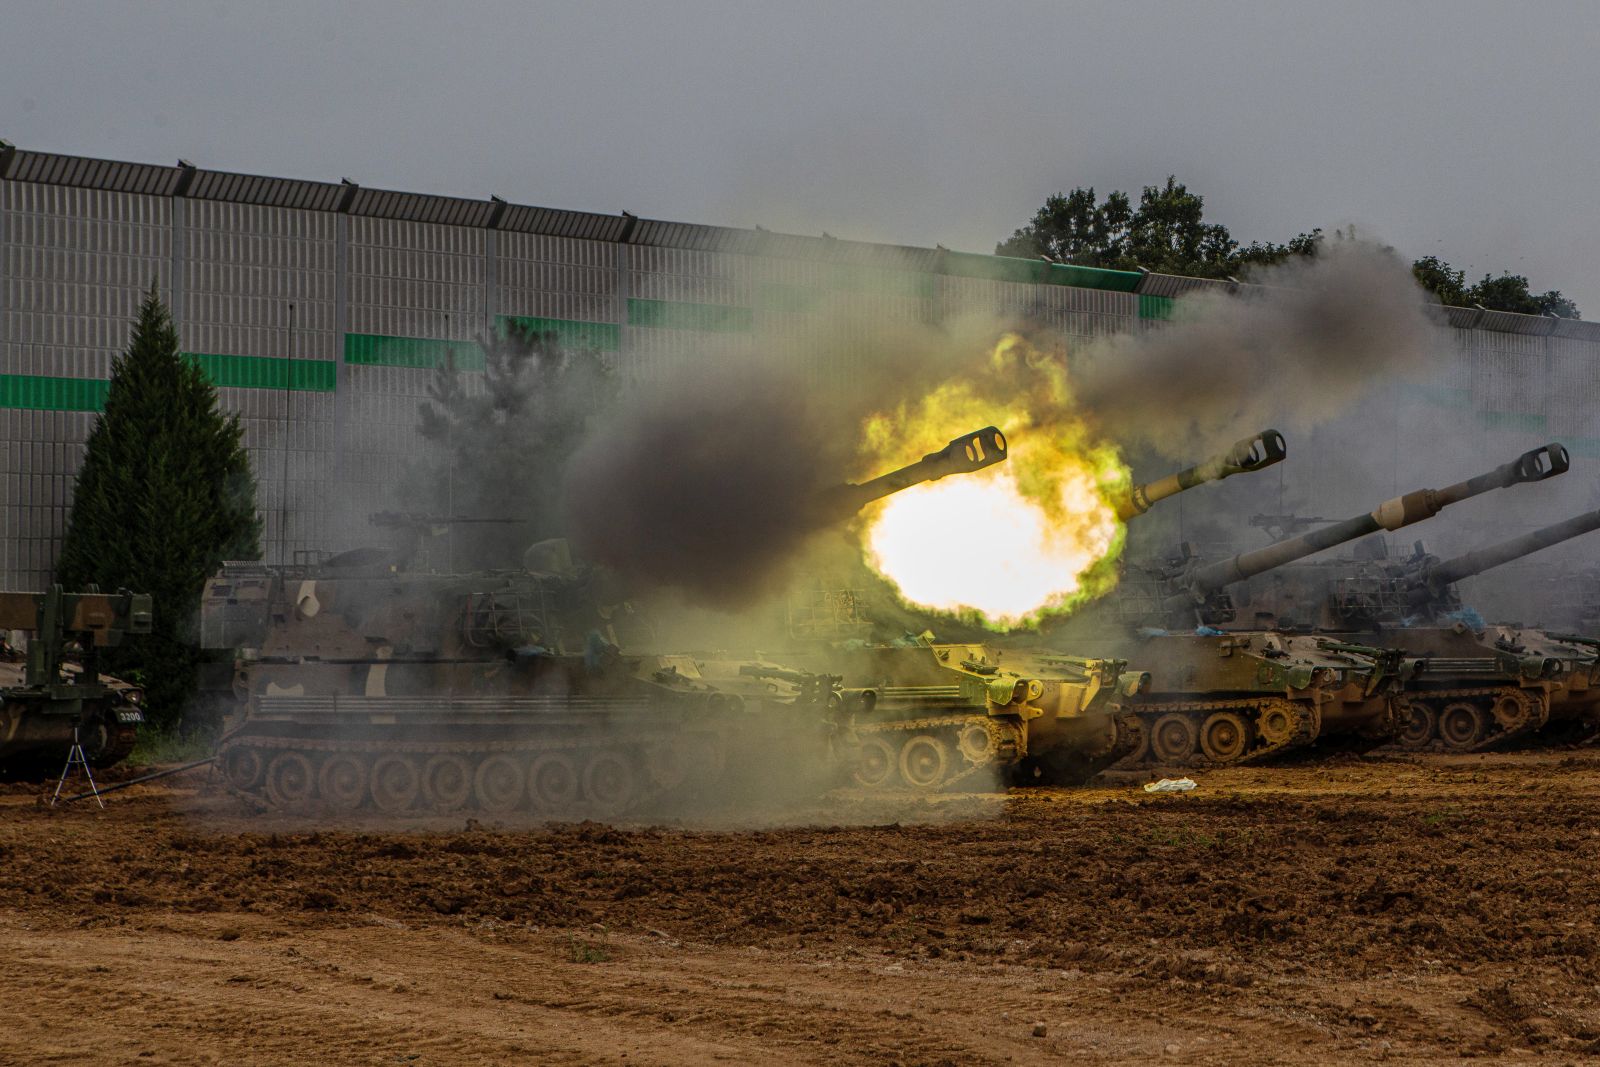 epa10128598 Soldiers of the South Korean Army's 28th Division conduct an artillery live-fire drill with K-55A1 self-propelled howitzers at an army training range in Pocheon, north of Seoul, South Korea, 19 August 2022. The military exercise was held to mark the seventh anniversary of the two Koreas' shelling across the inter-Korean border on 20 August 2015.  EPA/YONHAP SOUTH KOREA OUT